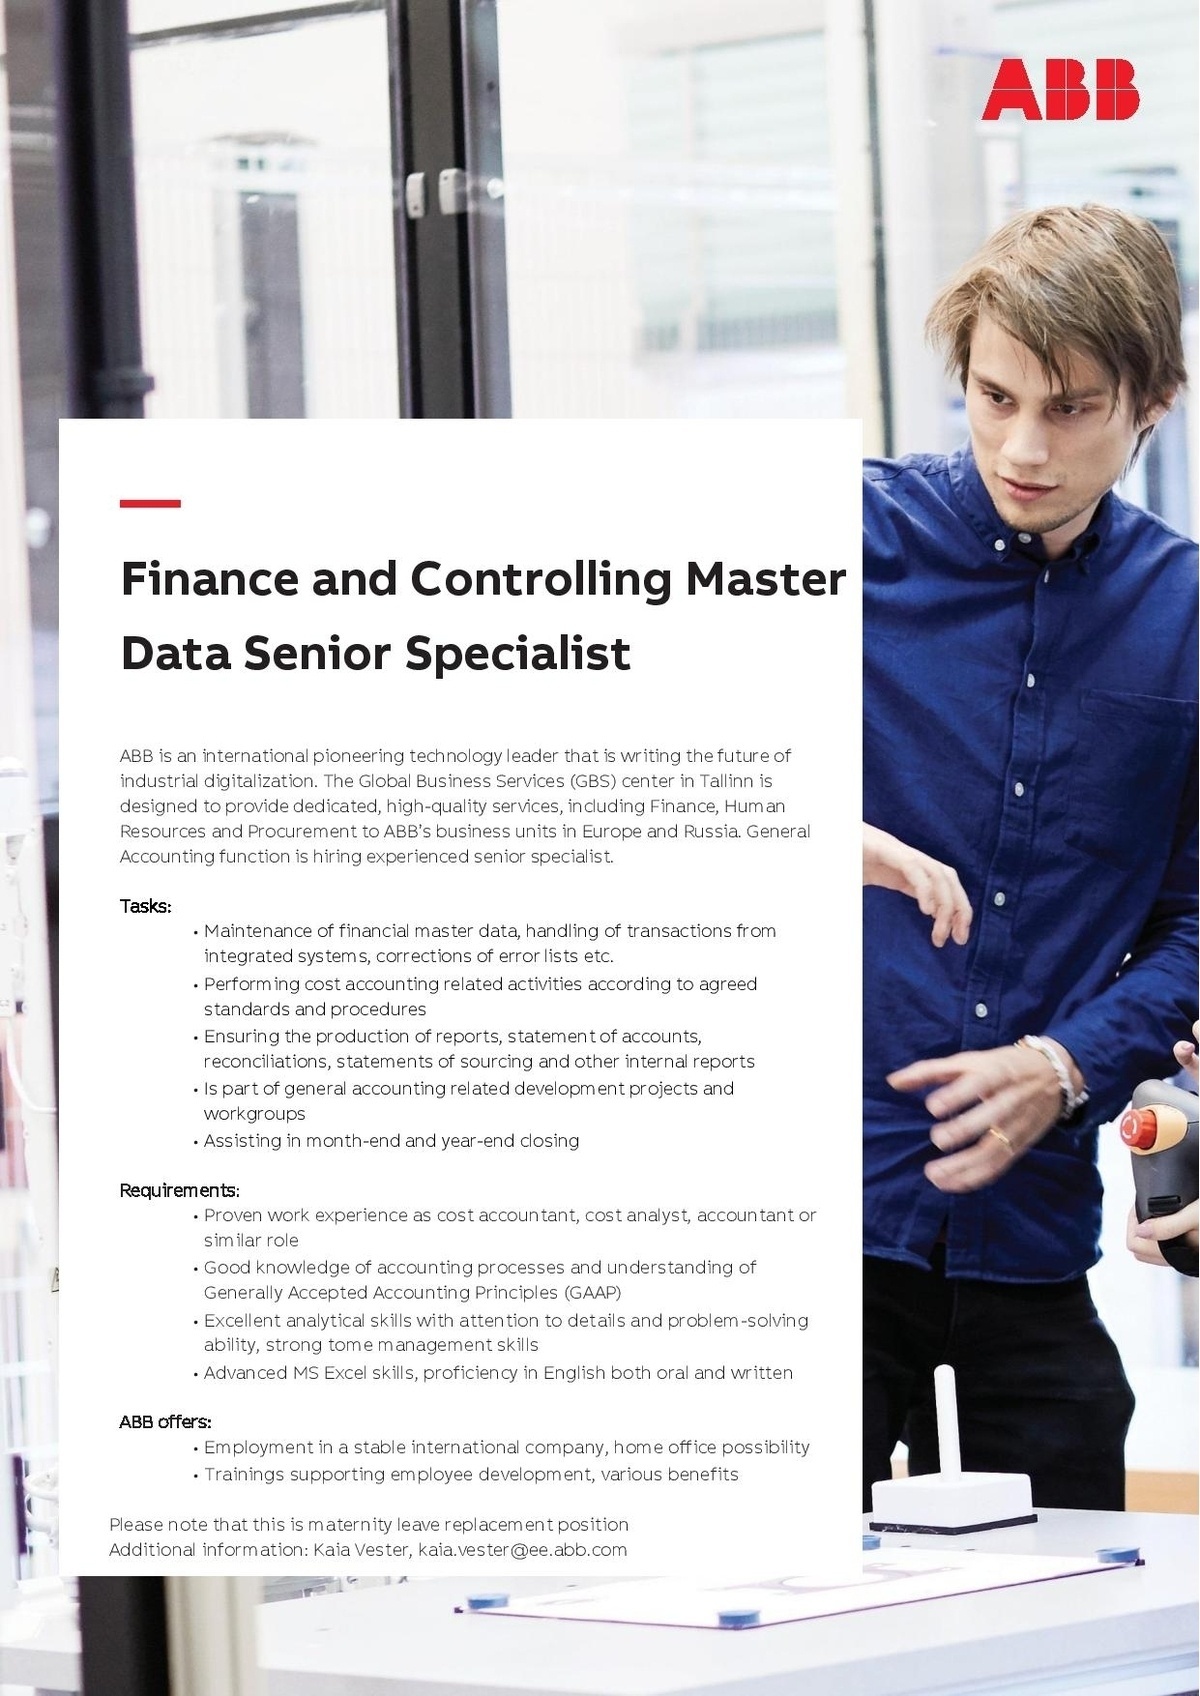 ABB AS Finance and Controlling Master Data Senior Specialist